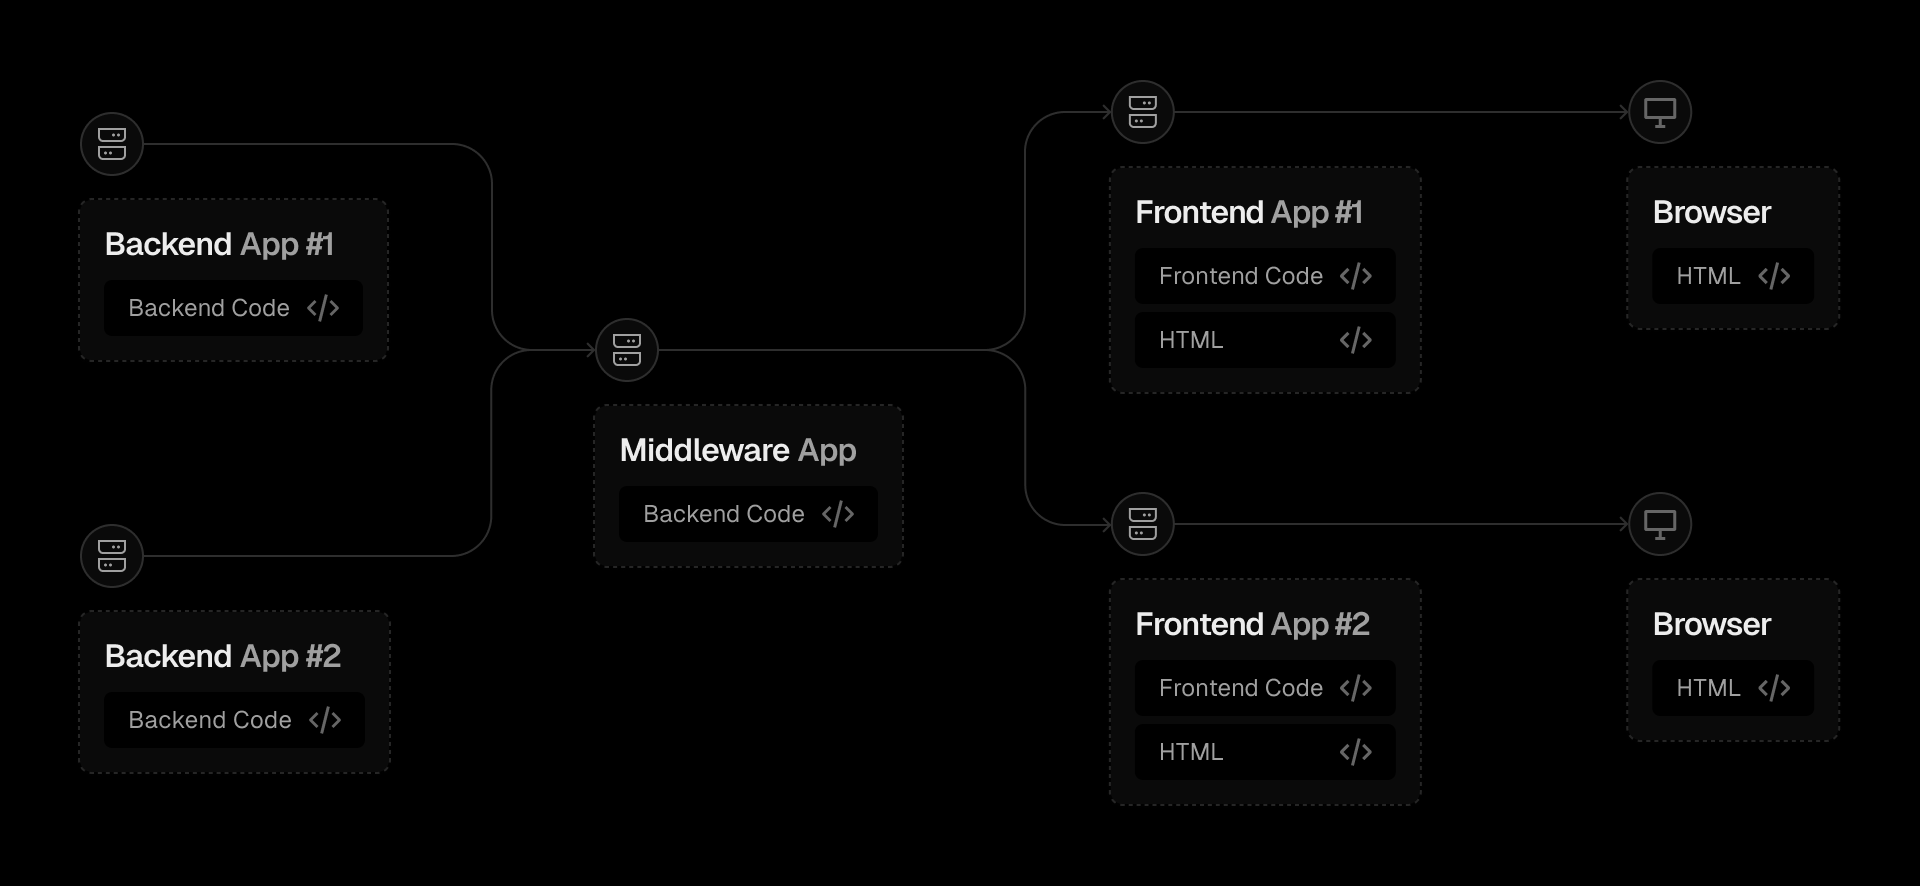 A headless frontend can be attached to your backend via a middleware layer that interprets backend data for the frontend and vice versa.​​​​‌﻿‍﻿​‍​‍‌‍﻿﻿‌﻿​‍‌‍‍‌‌‍‌﻿‌‍‍‌‌‍﻿‍​‍​‍​﻿‍‍​‍​‍‌‍​﻿‌‍﻿﻿‌‍﻿‍‌﻿‌​‌‍‌‌‌‍﻿‍‌﻿‌​‌‍‌‍‌﻿‌‌‌‍﻿​​‍﻿‍‌‍​﻿‌‍﻿﻿‌‍﻿‌​‍​‍​‍﻿​​‍​‍‌‍‍​‌﻿​‍‌‍‌‌‌‍‌‍​‍​‍​﻿‍‍​‍​‍​‍﻿﻿‌‍​‌‌﻿​​‌‍‍‌​‍﻿﻿‌‍​‍‌‍﻿​‌‍﻿﻿‌‍‌﻿​‍﻿﻿‌‍‌‌‌‍‌​‌‍‍‌‌﻿‌​​﻿﻿﻿‌‍‌‌​﻿﻿‌​﻿​﻿‌​﻿﻿‌﻿‌‌‌‍‌​‌‌​​‌​﻿‌‌‍‍​‌​﻿‌​﻿​​‌​﻿﻿‌‍​‍‌​‍﻿‌‌​​‌‍‍​‌‍‍​​﻿‌​‌‍‌‌‌​​‌‌﻿‌‍‌​​﻿‌​‍‍‌‍‌‌​‍‌‍‌﻿‌​​﻿﻿‌‌‍​‌​‍​‍​‍﻿​​‍​‍‌﻿‌​‌﻿‍‌‌﻿​​‌‍‌‌​‍​‍​﻿‍‍​‍​‍‌﻿‌​‌‍‌‌‌﻿‍​‌﻿‌​​‍​‍​‍﻿​​‍​‍‌‍‌​‌‍​‌‌﻿‌​‌‍​‌​‍​‍​﻿‍‍​‍​‍‌‍‌​‌‍‌‌‌﻿​﻿‌‍​﻿‌﻿​‍‌‍‍‌‌﻿​​‌﻿‌​‌‍‍‌‌‍﻿﻿‌‍﻿‍​‍​‍‌﻿﻿‌